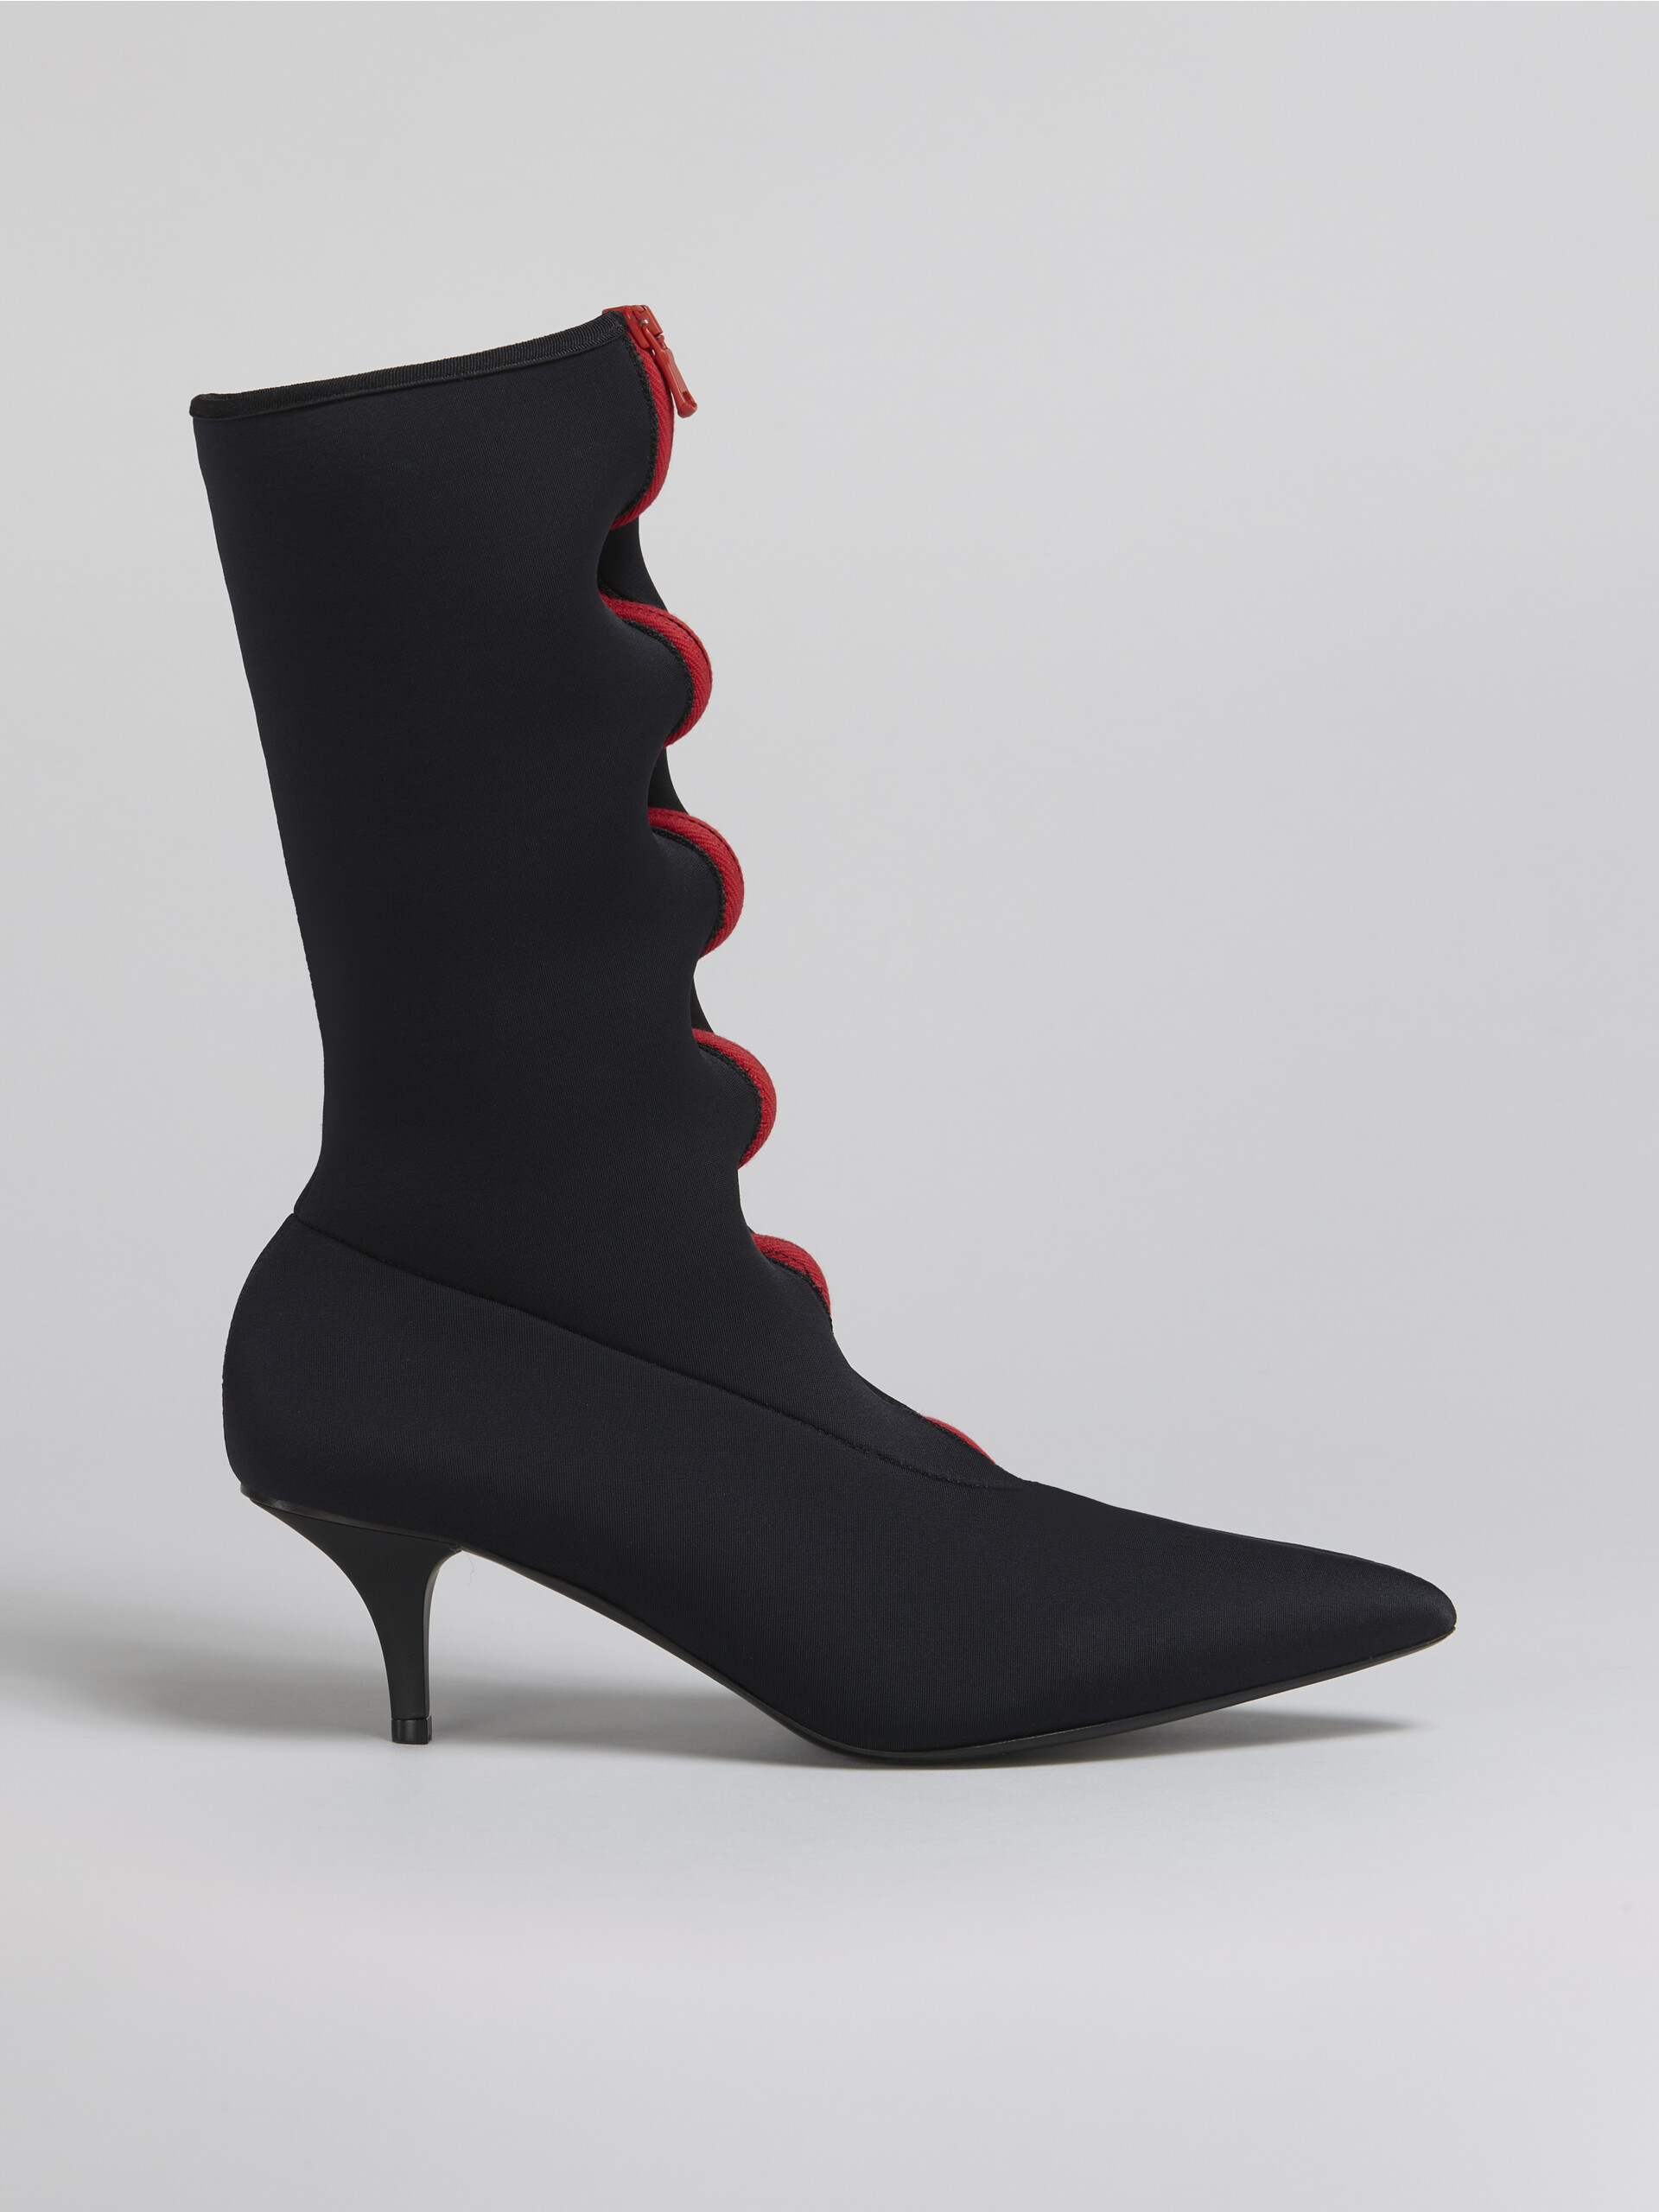 Pointed bootie in stretch neoprene - Boots - Image 1